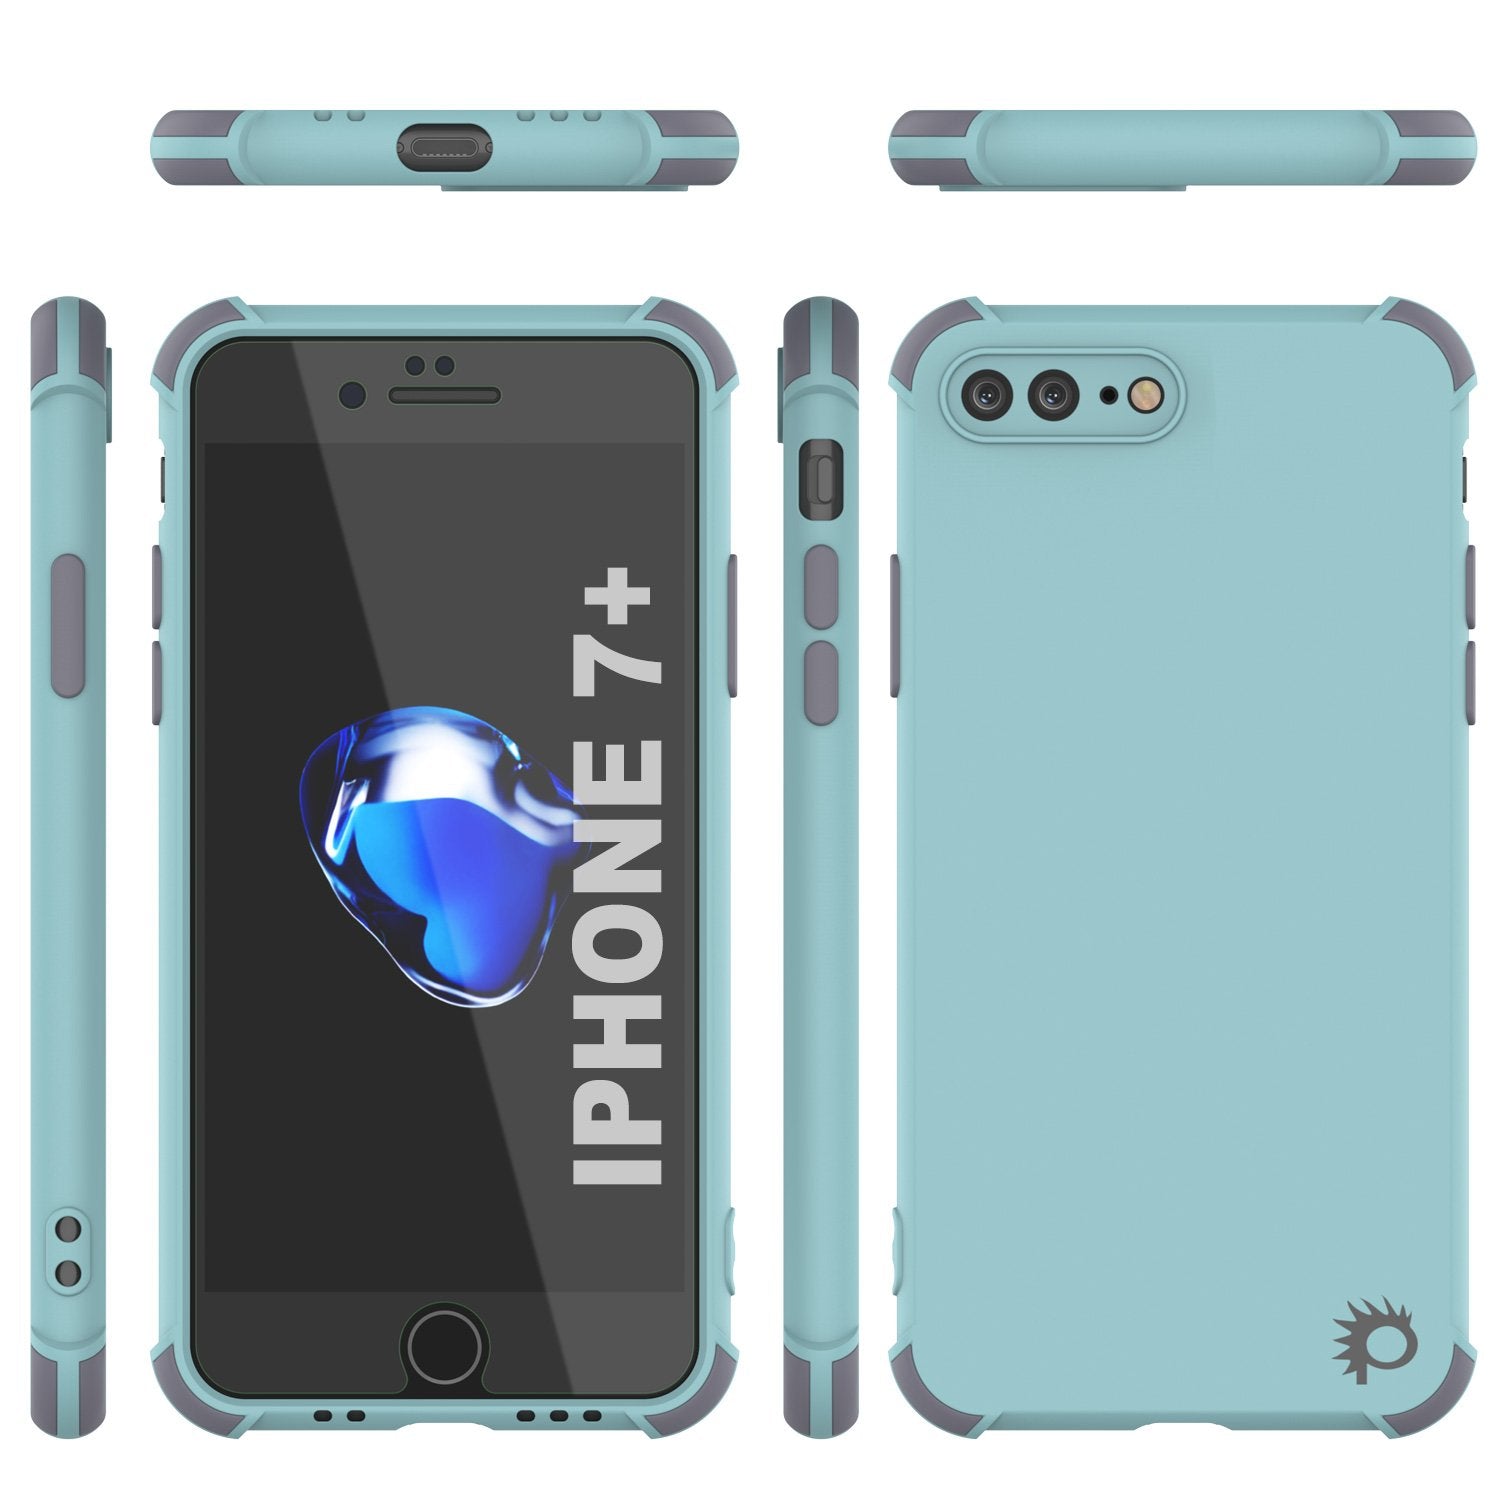 Punkcase Protective & Lightweight TPU Case [Sunshine Series] for iPhone 7+ Plus [Teal]